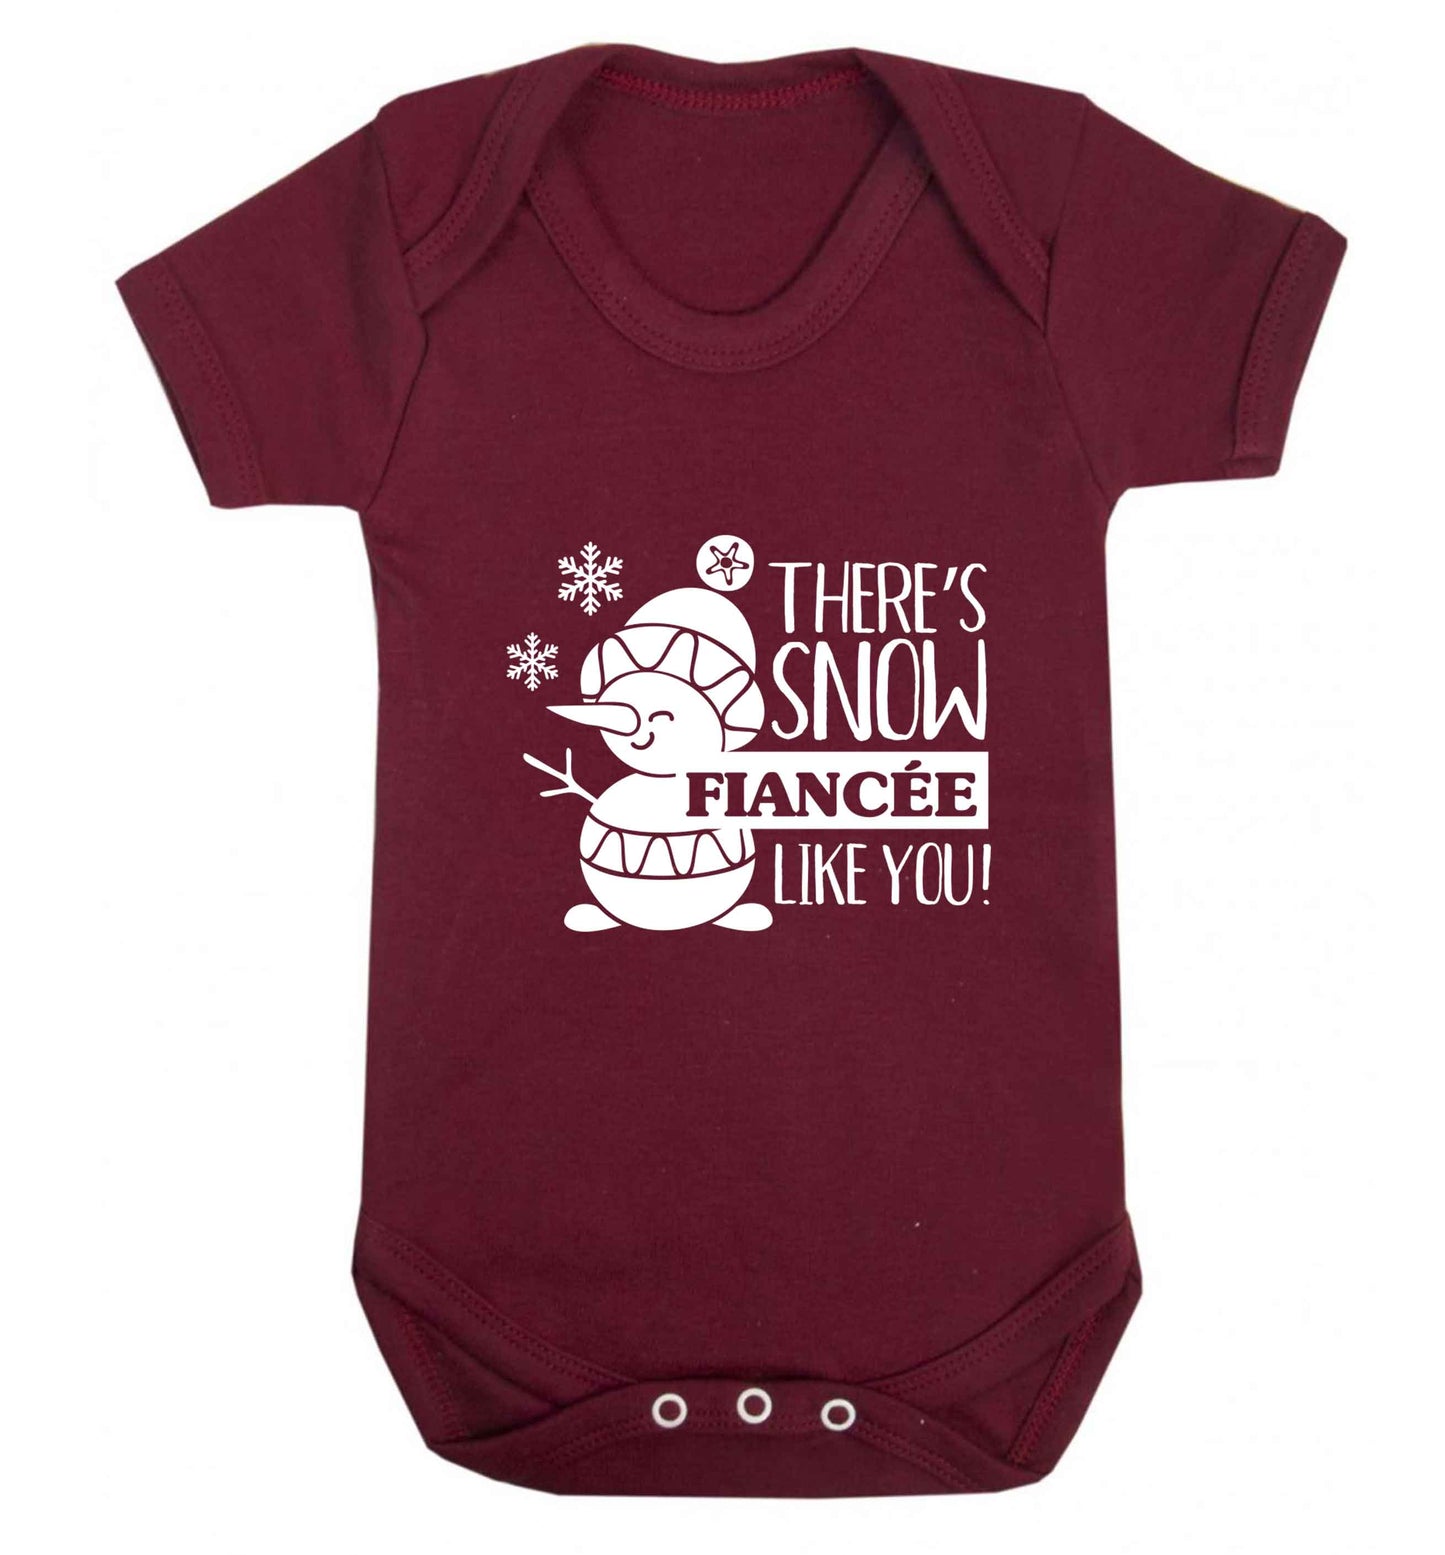 There's snow fiancee like you baby vest maroon 18-24 months